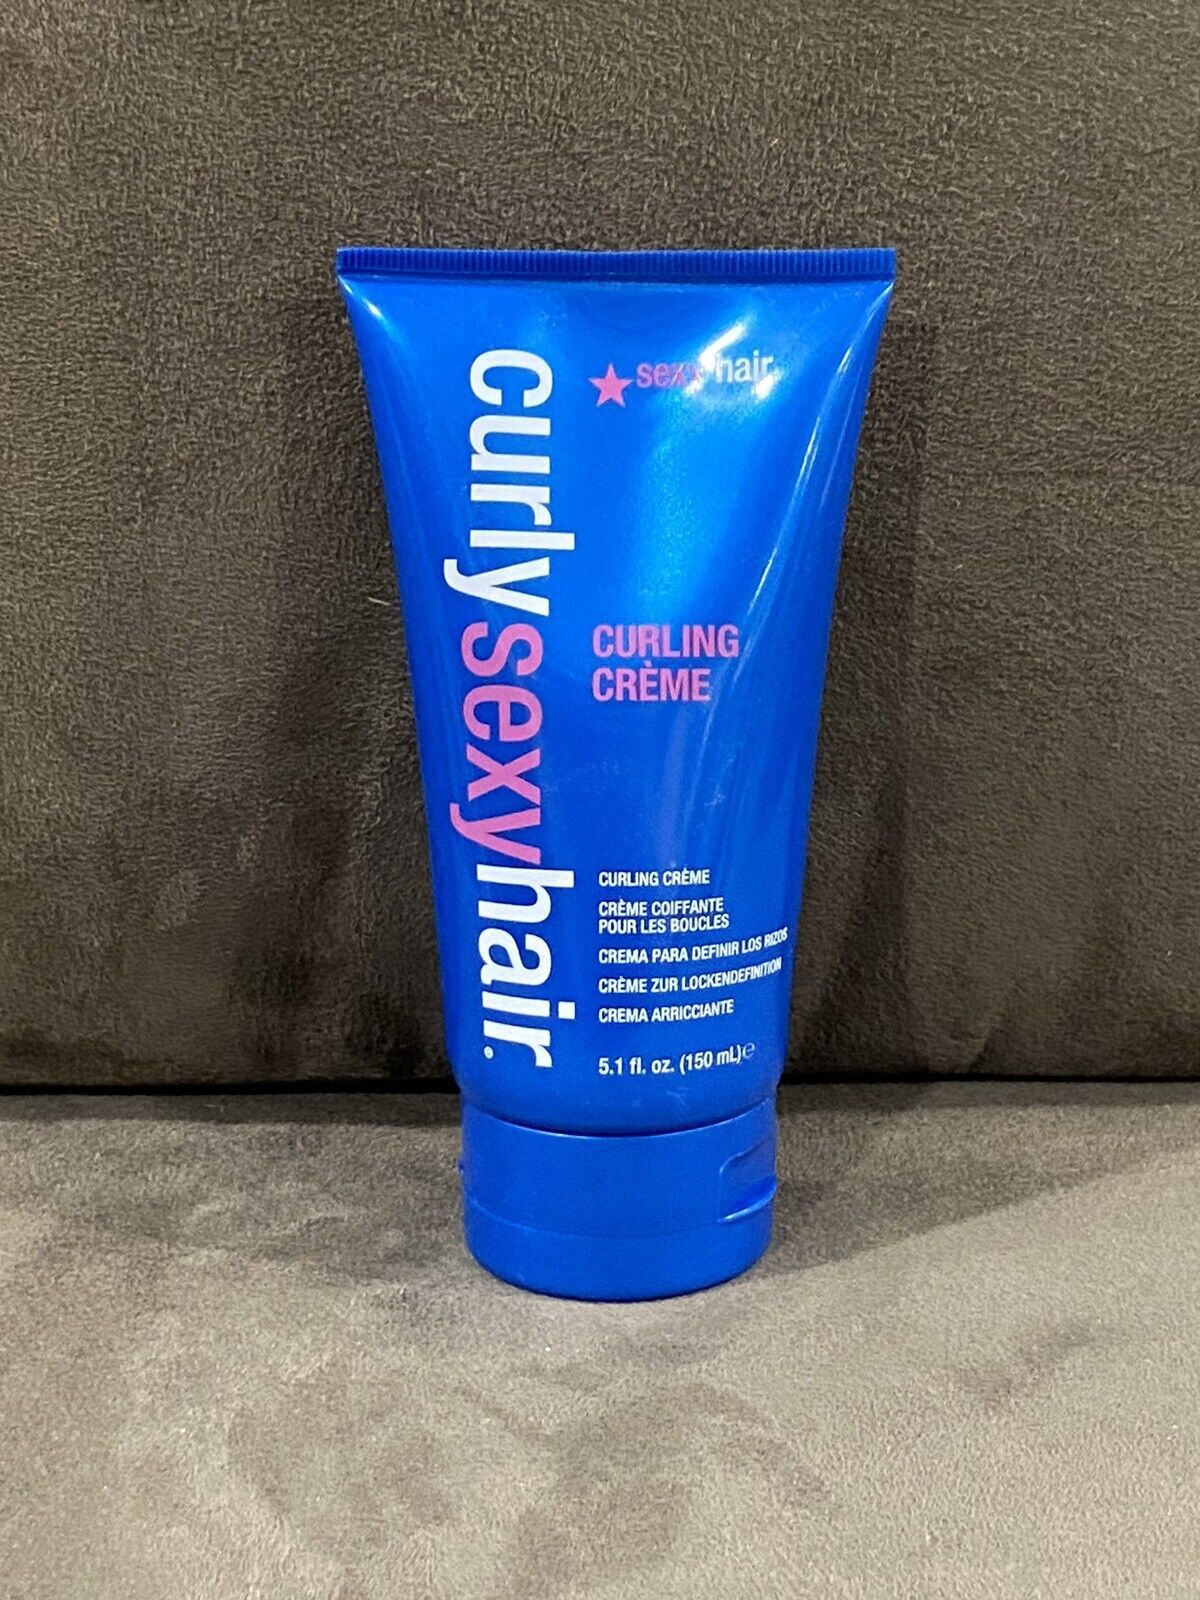 NEW! CURLY SEXY HAIR BY SEXY HAIR CURLING CREME CREAM ORIGINAL BLUE TUBE 5.1 OZ - $49.99